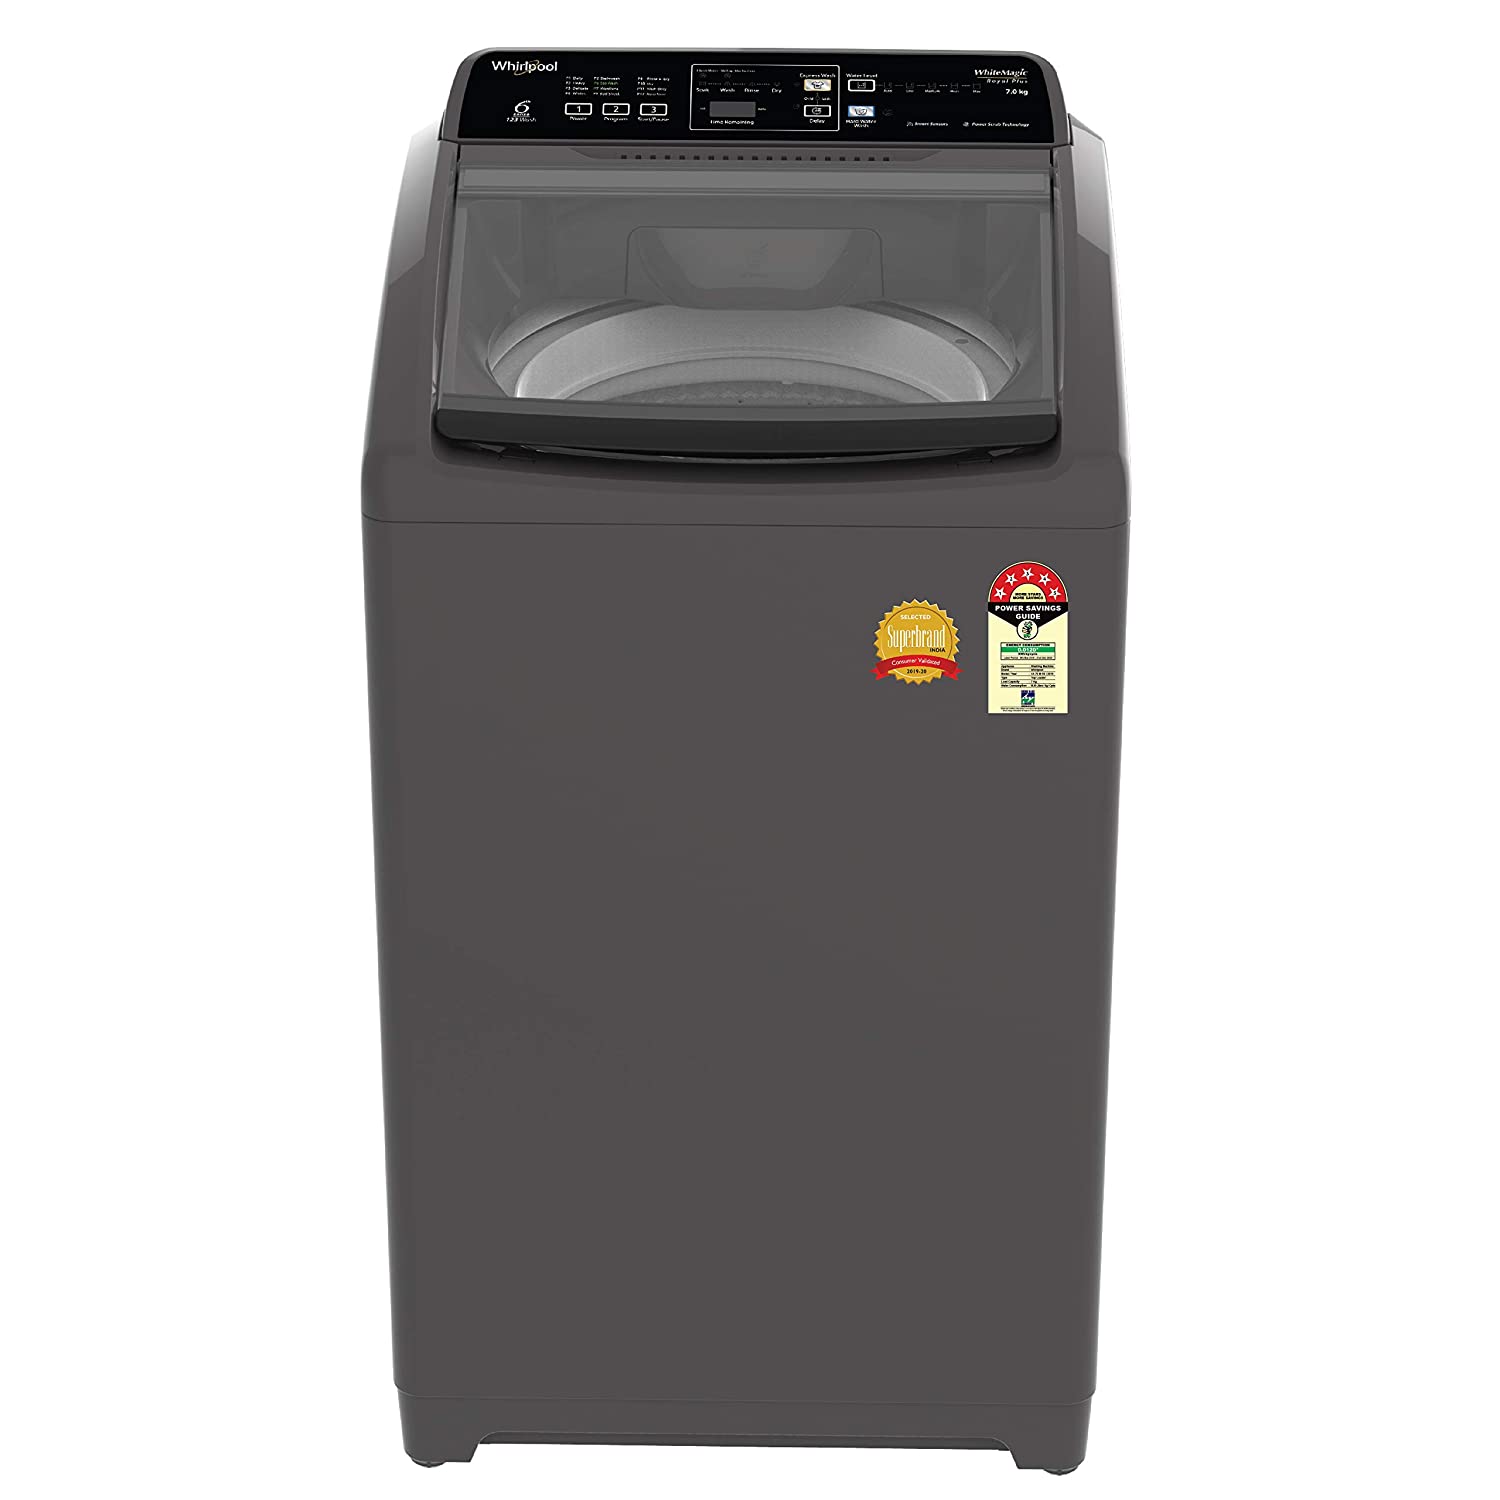 Amazon Great Indian Festival Sale: Huge discount on top loading automatic washing machine, price starts from 15 thousand